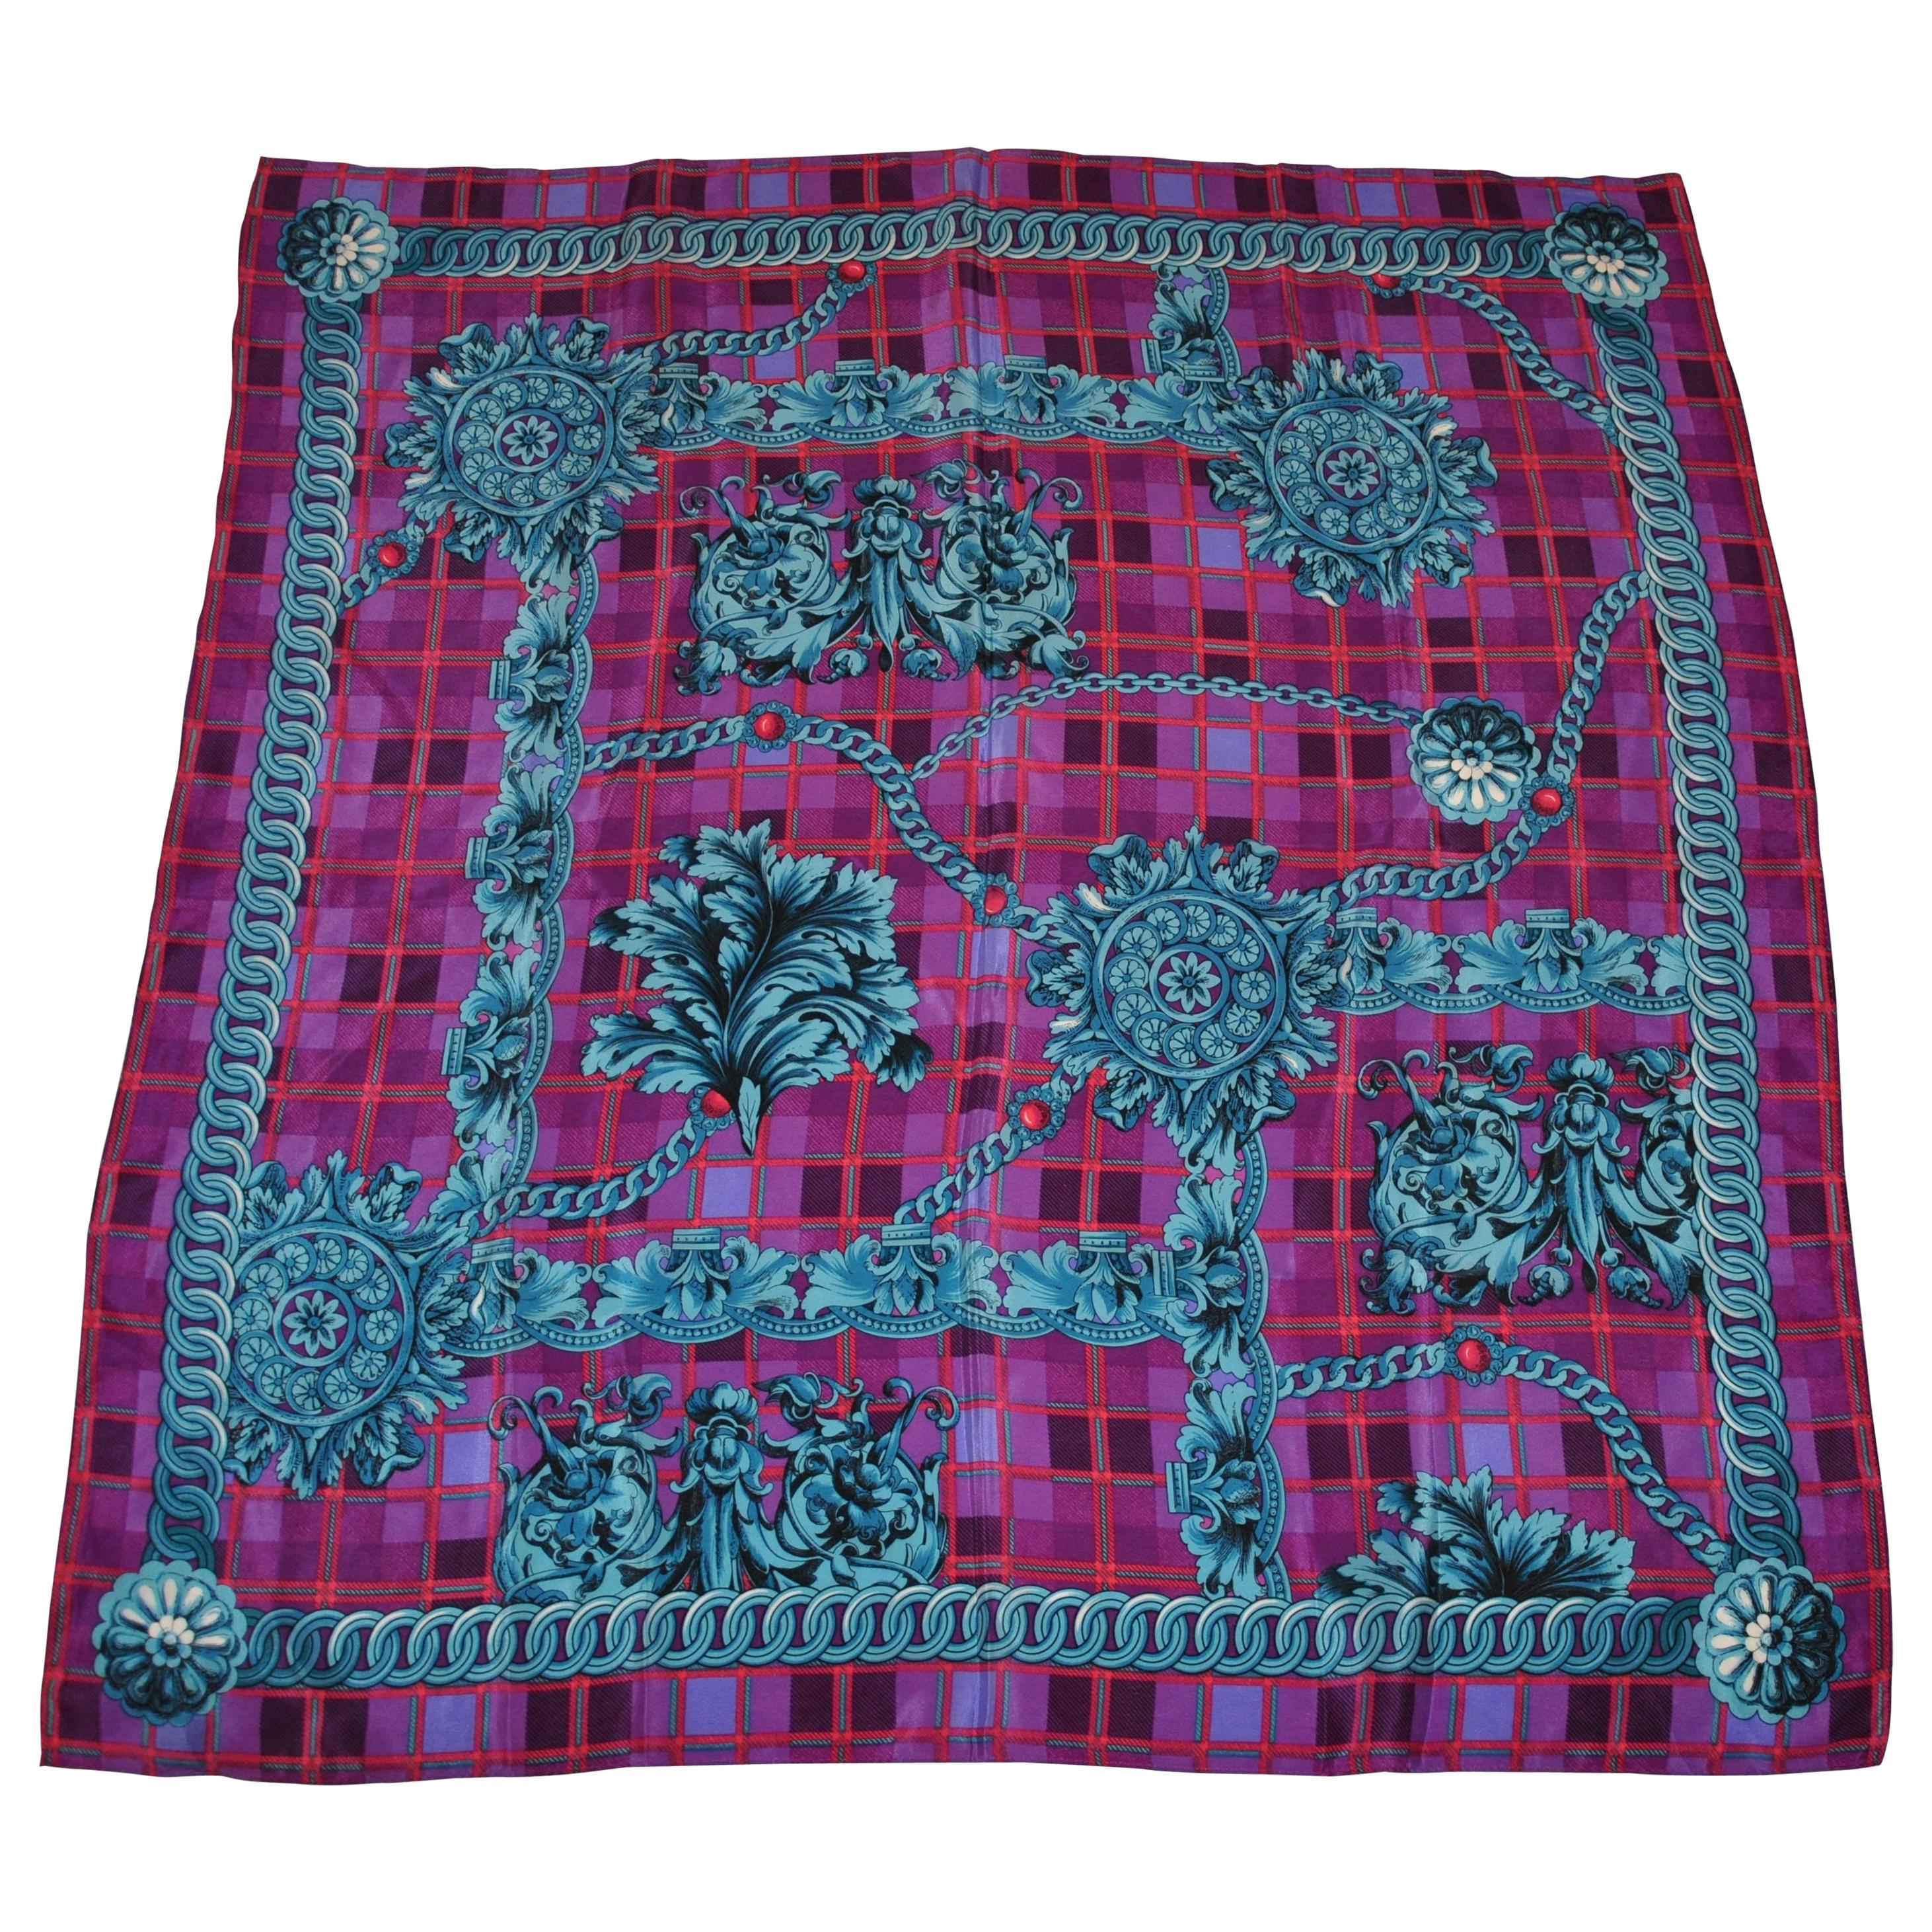 Majestic Shades of "Violet & Turquoise" Silk Scarf